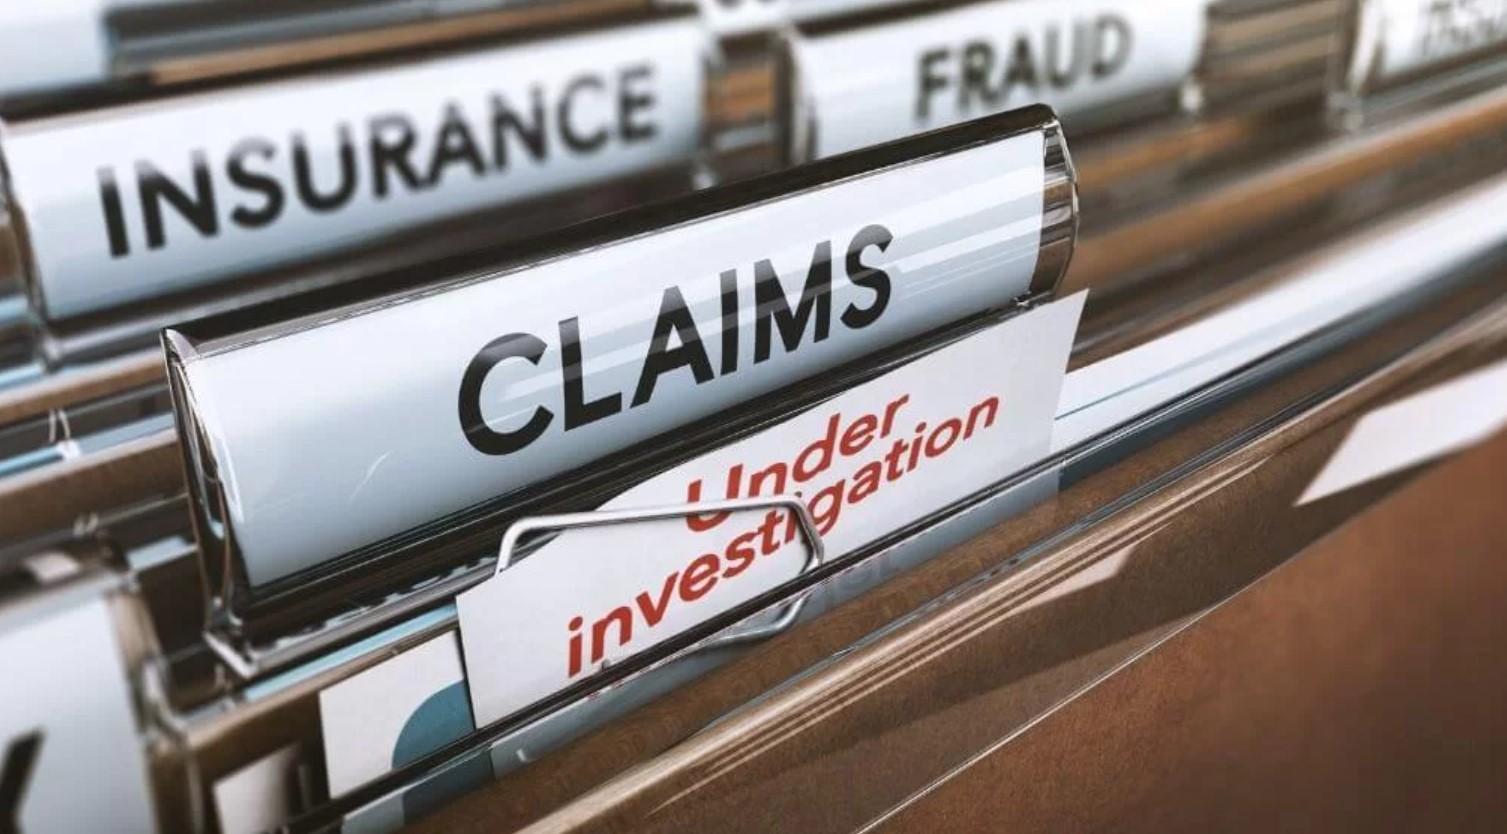 Insurance Claims Under Investigation